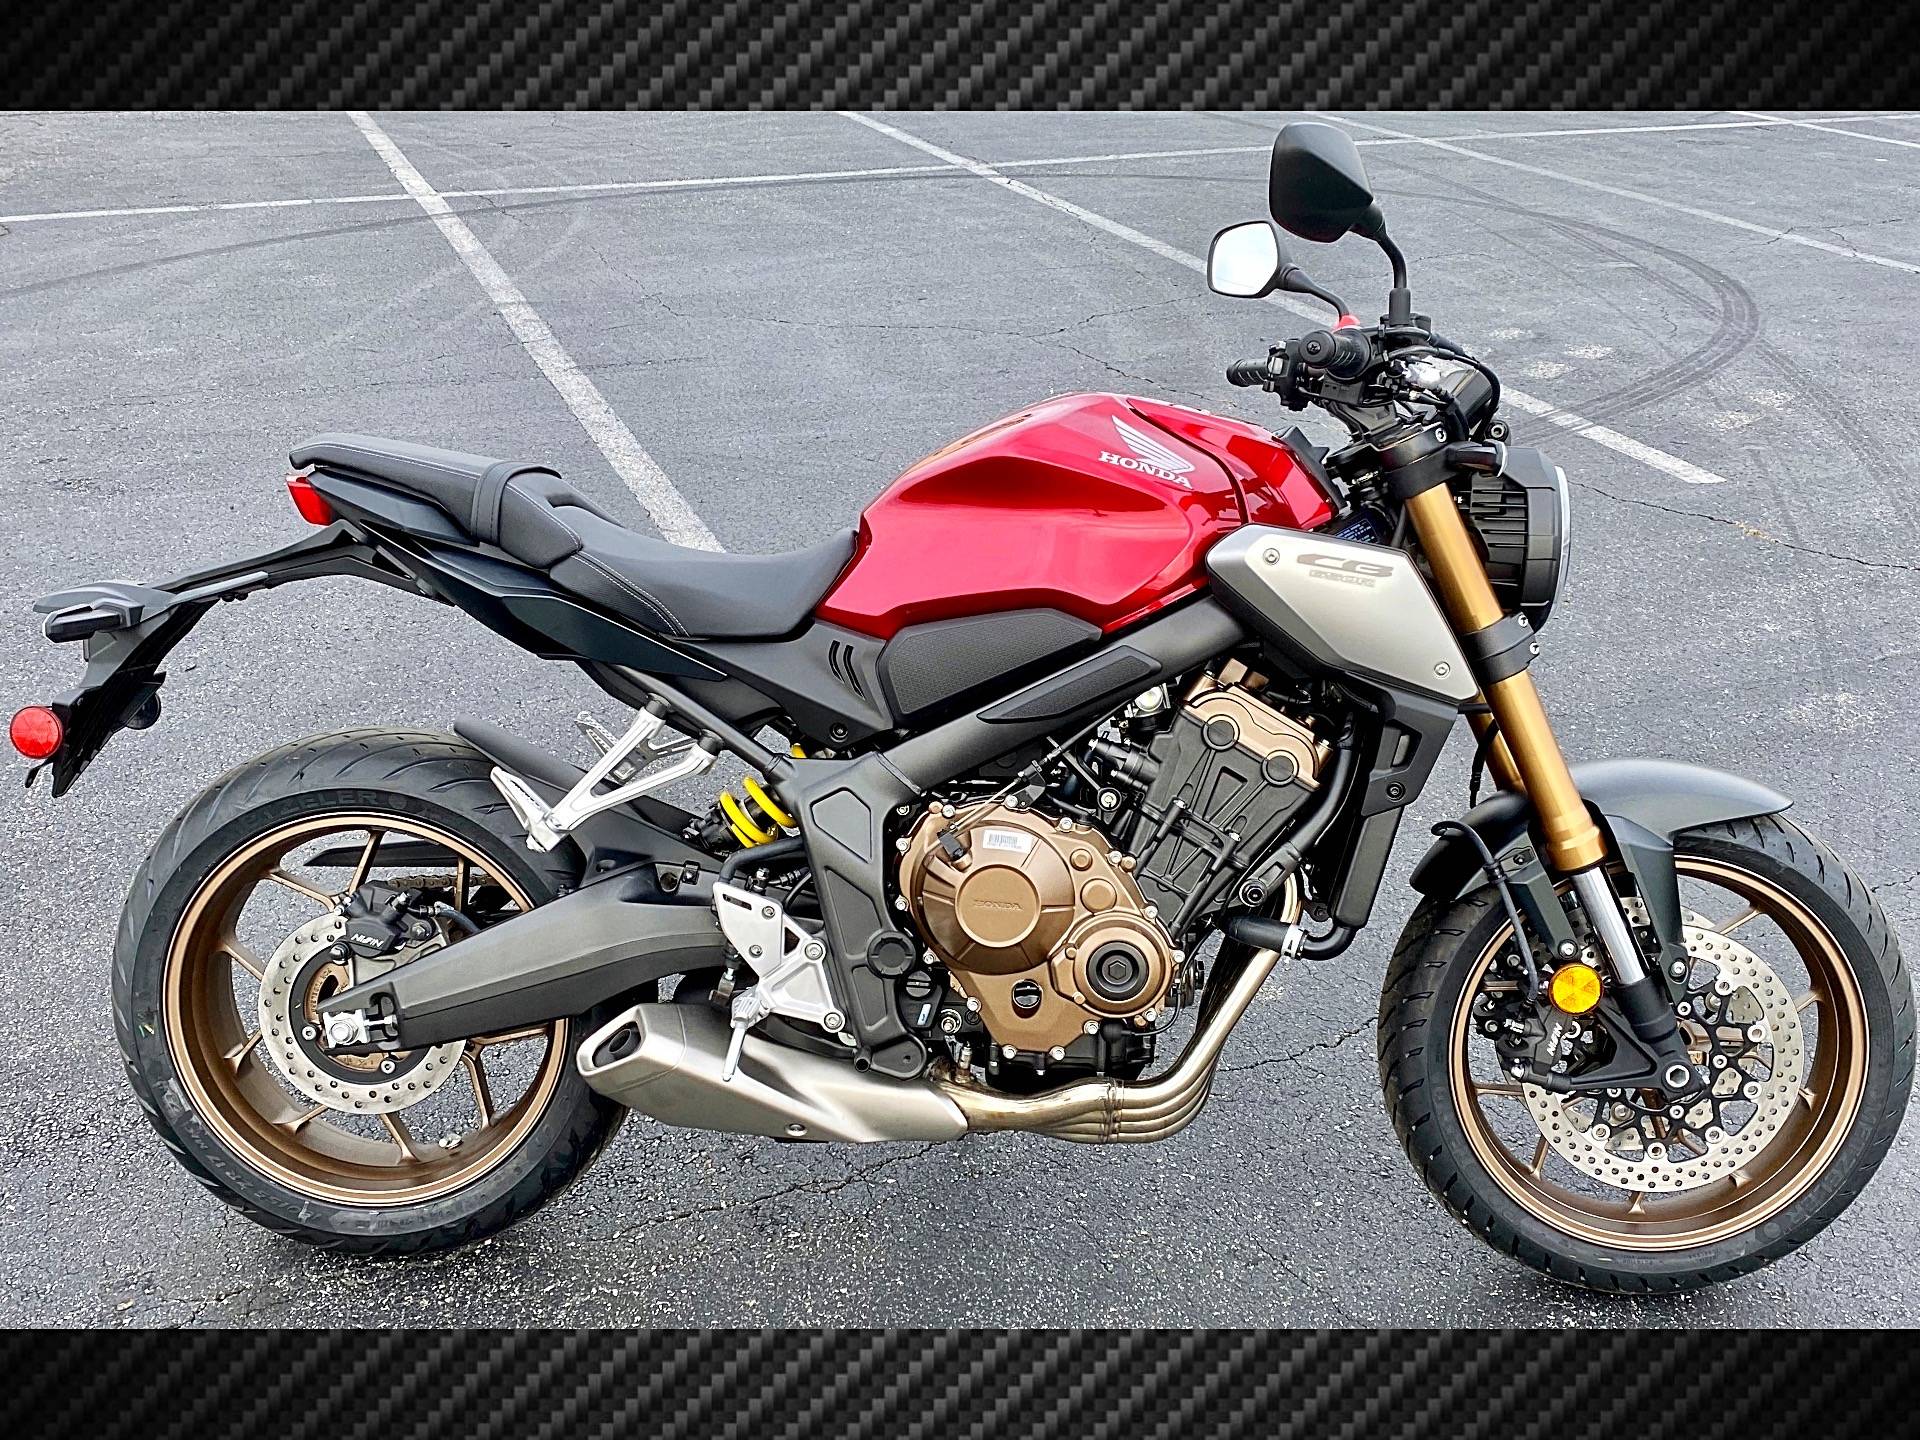 New 2019 Honda CB650R Motorcycles in Statesville, NC | Stock Number ...